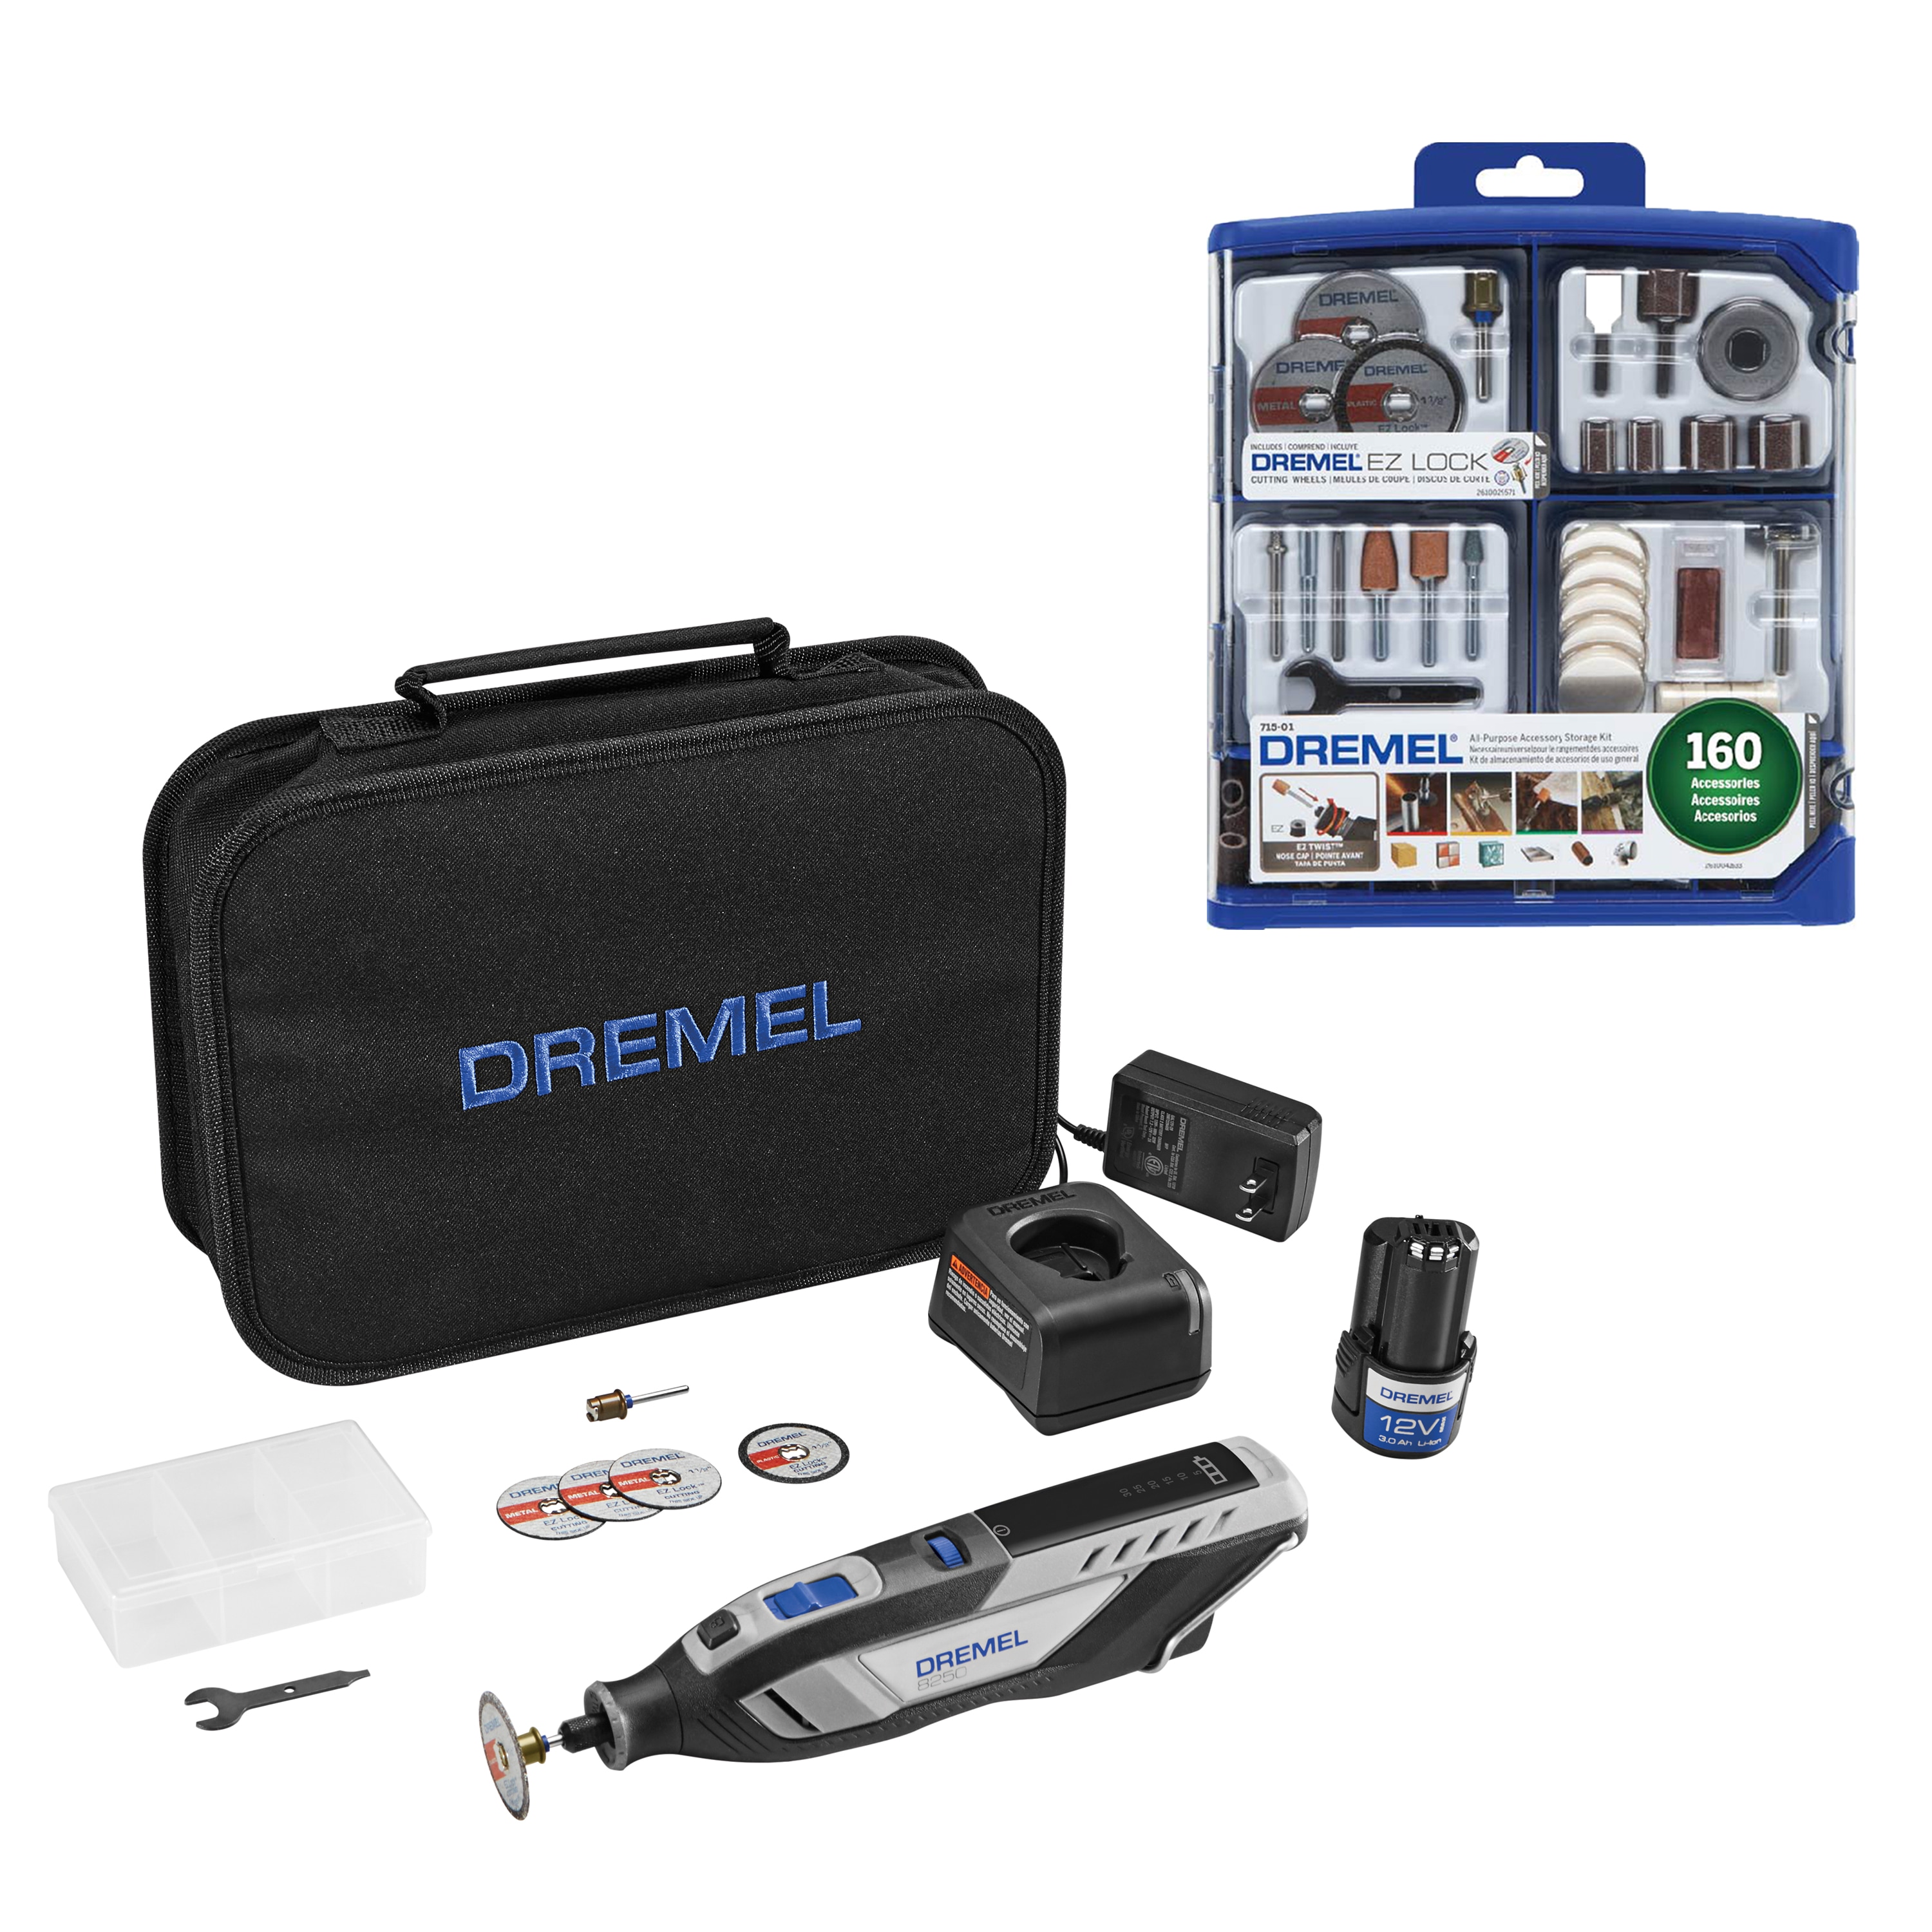 Dremel 8250 Brushless Cordless 12V Variable Speed Rotary Tool with 5 Accessories + 160-Piece Accessory Kit